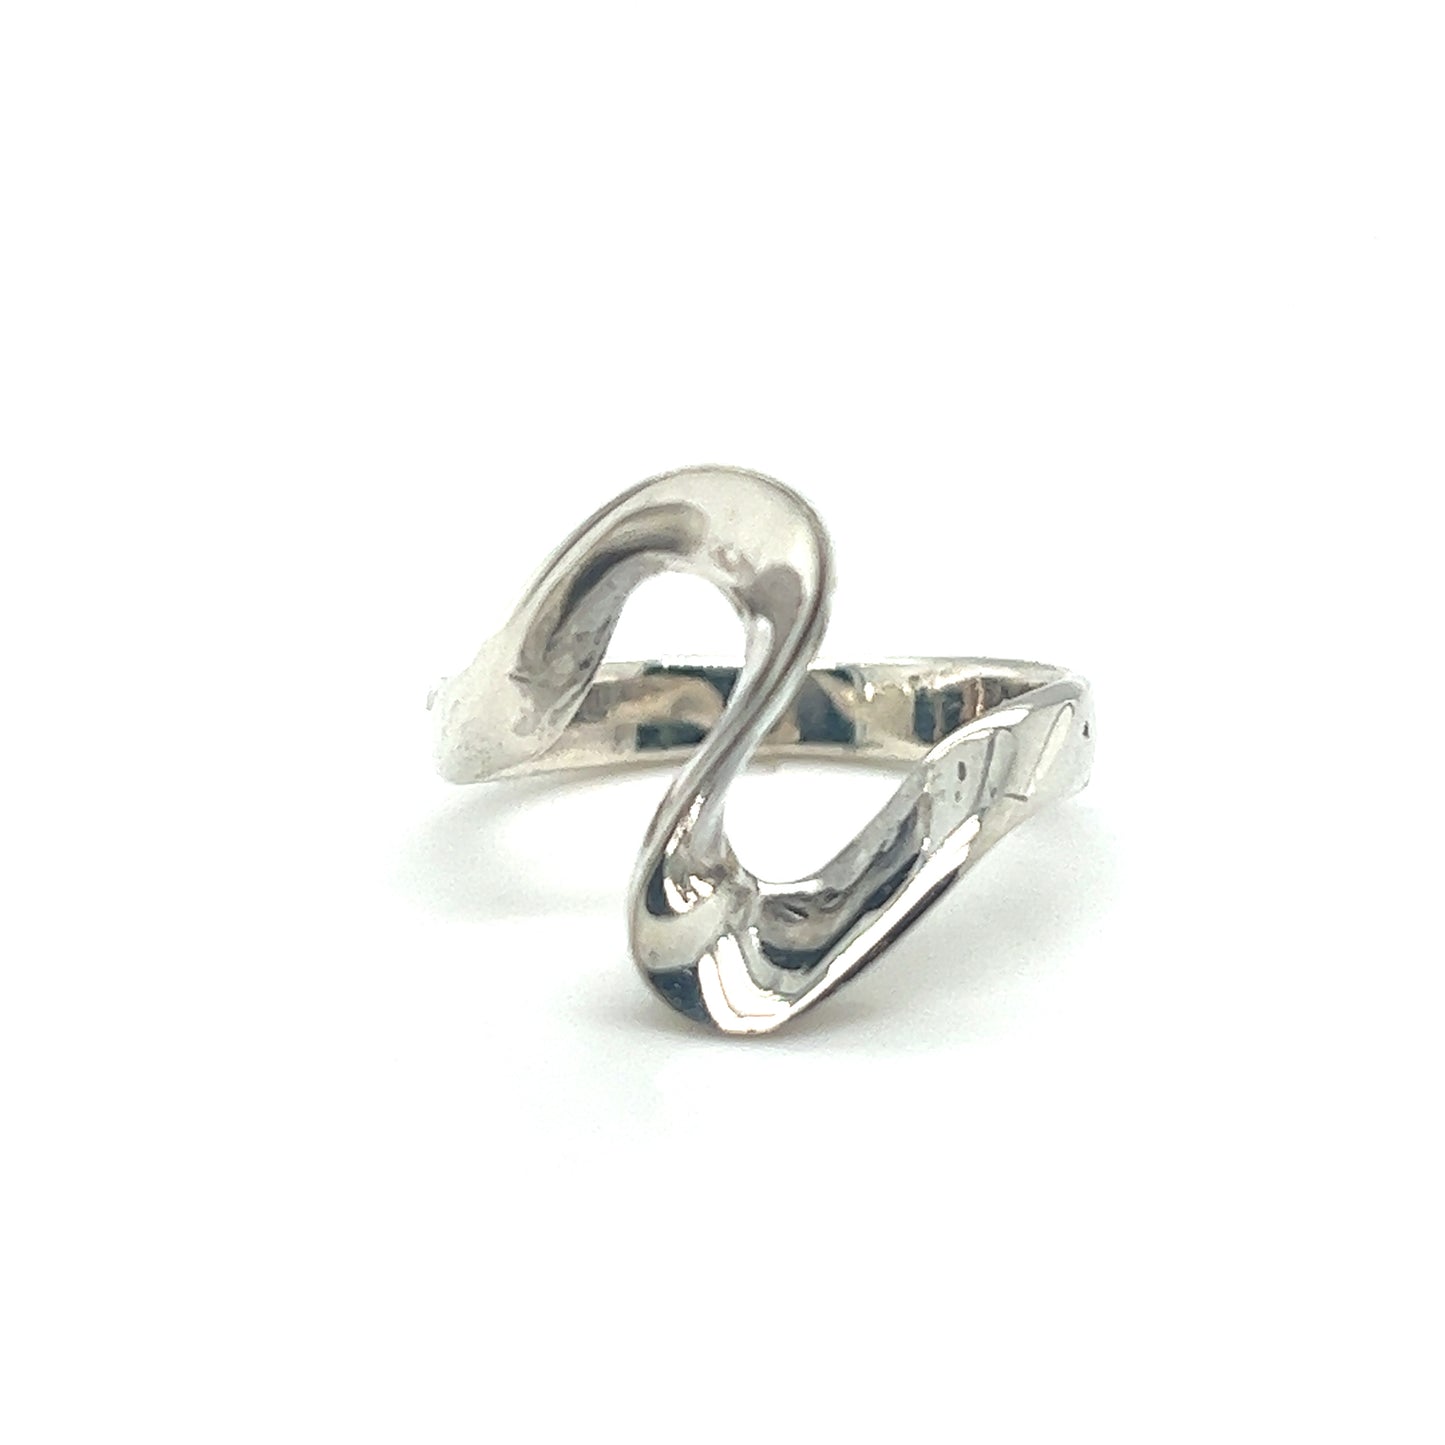 A sleek Super Silver Freeform Swirl Ring with a captivating swirl "S" pattern.